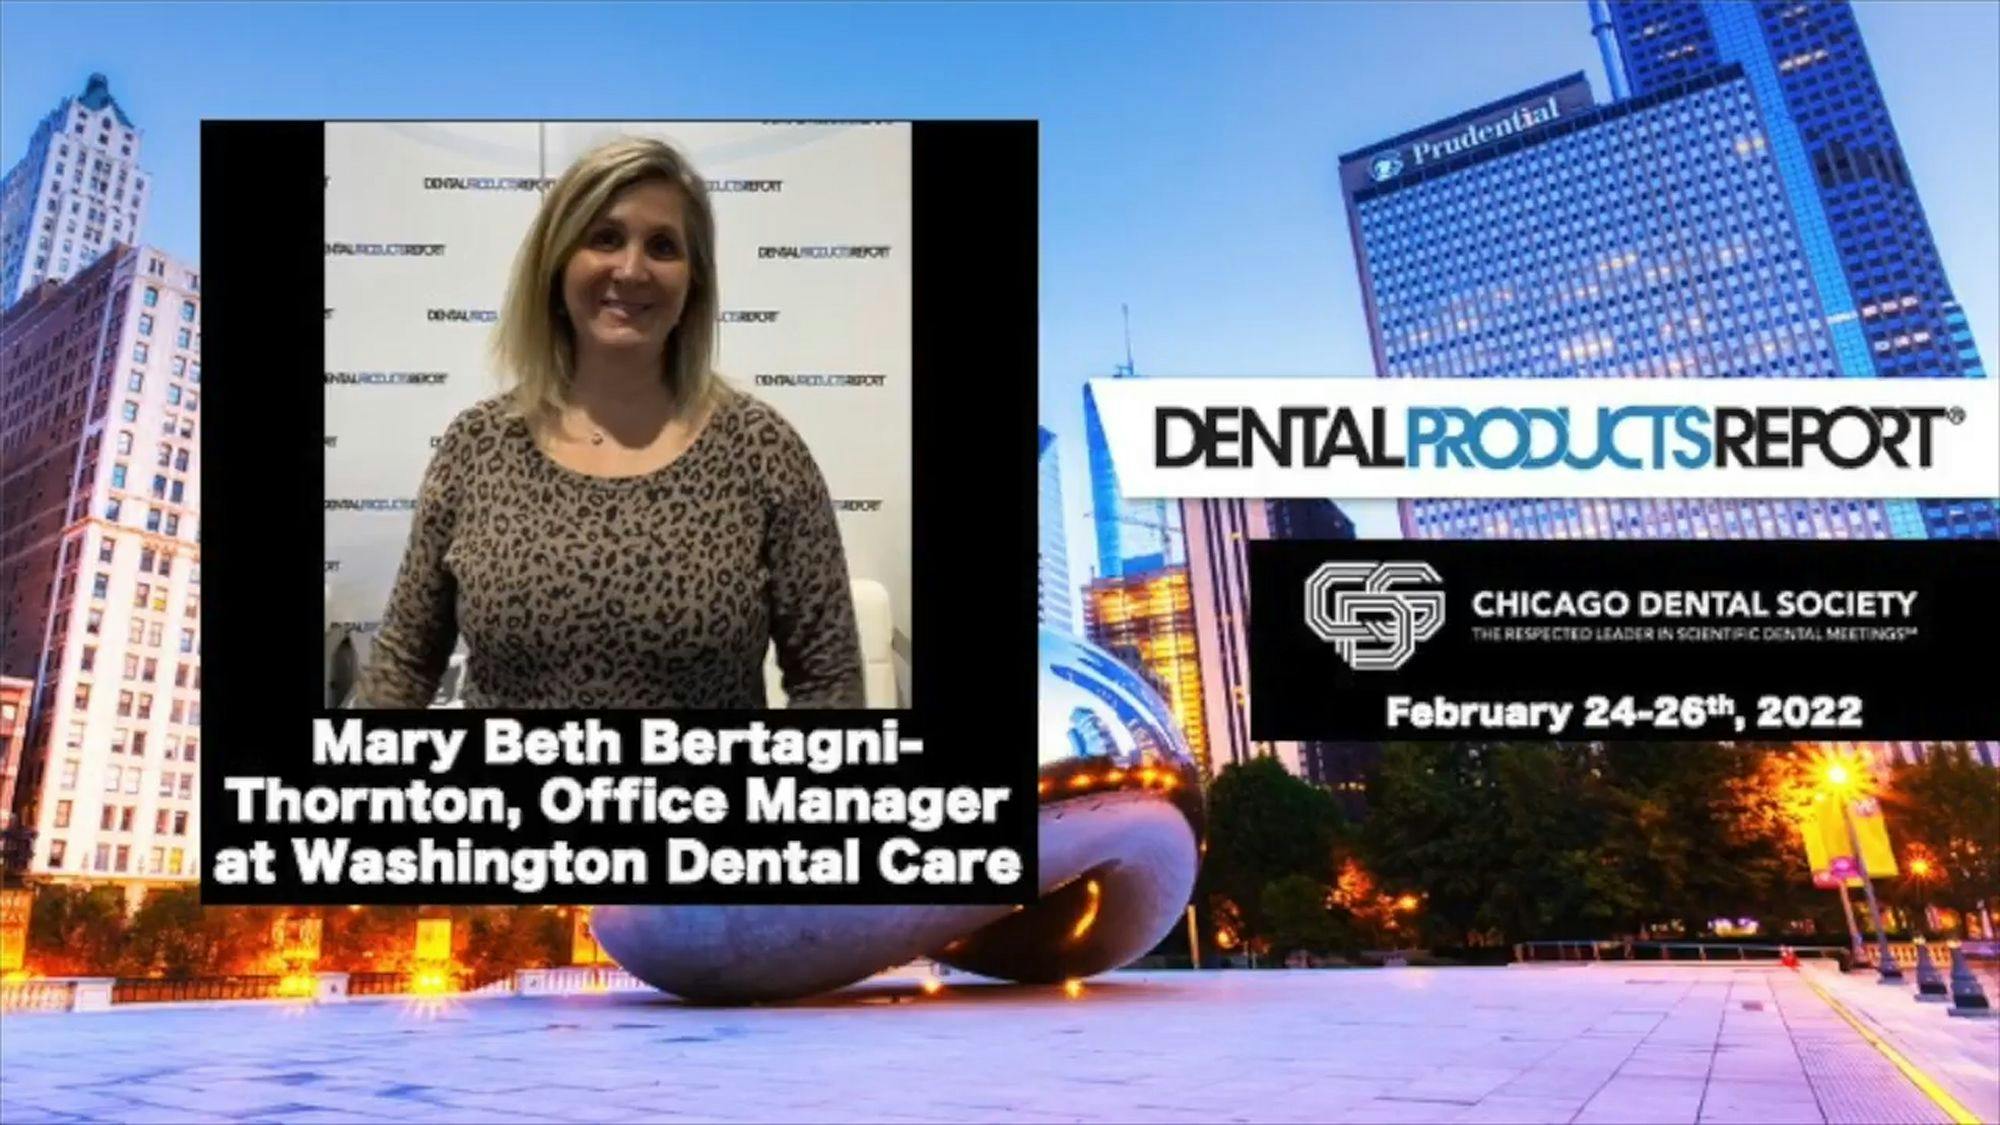 2022 Chicago Dental Society Midwinter Meeting, Interview with Mary Beth Bertagni-Thornton, Office Manager at Washington Dental Care